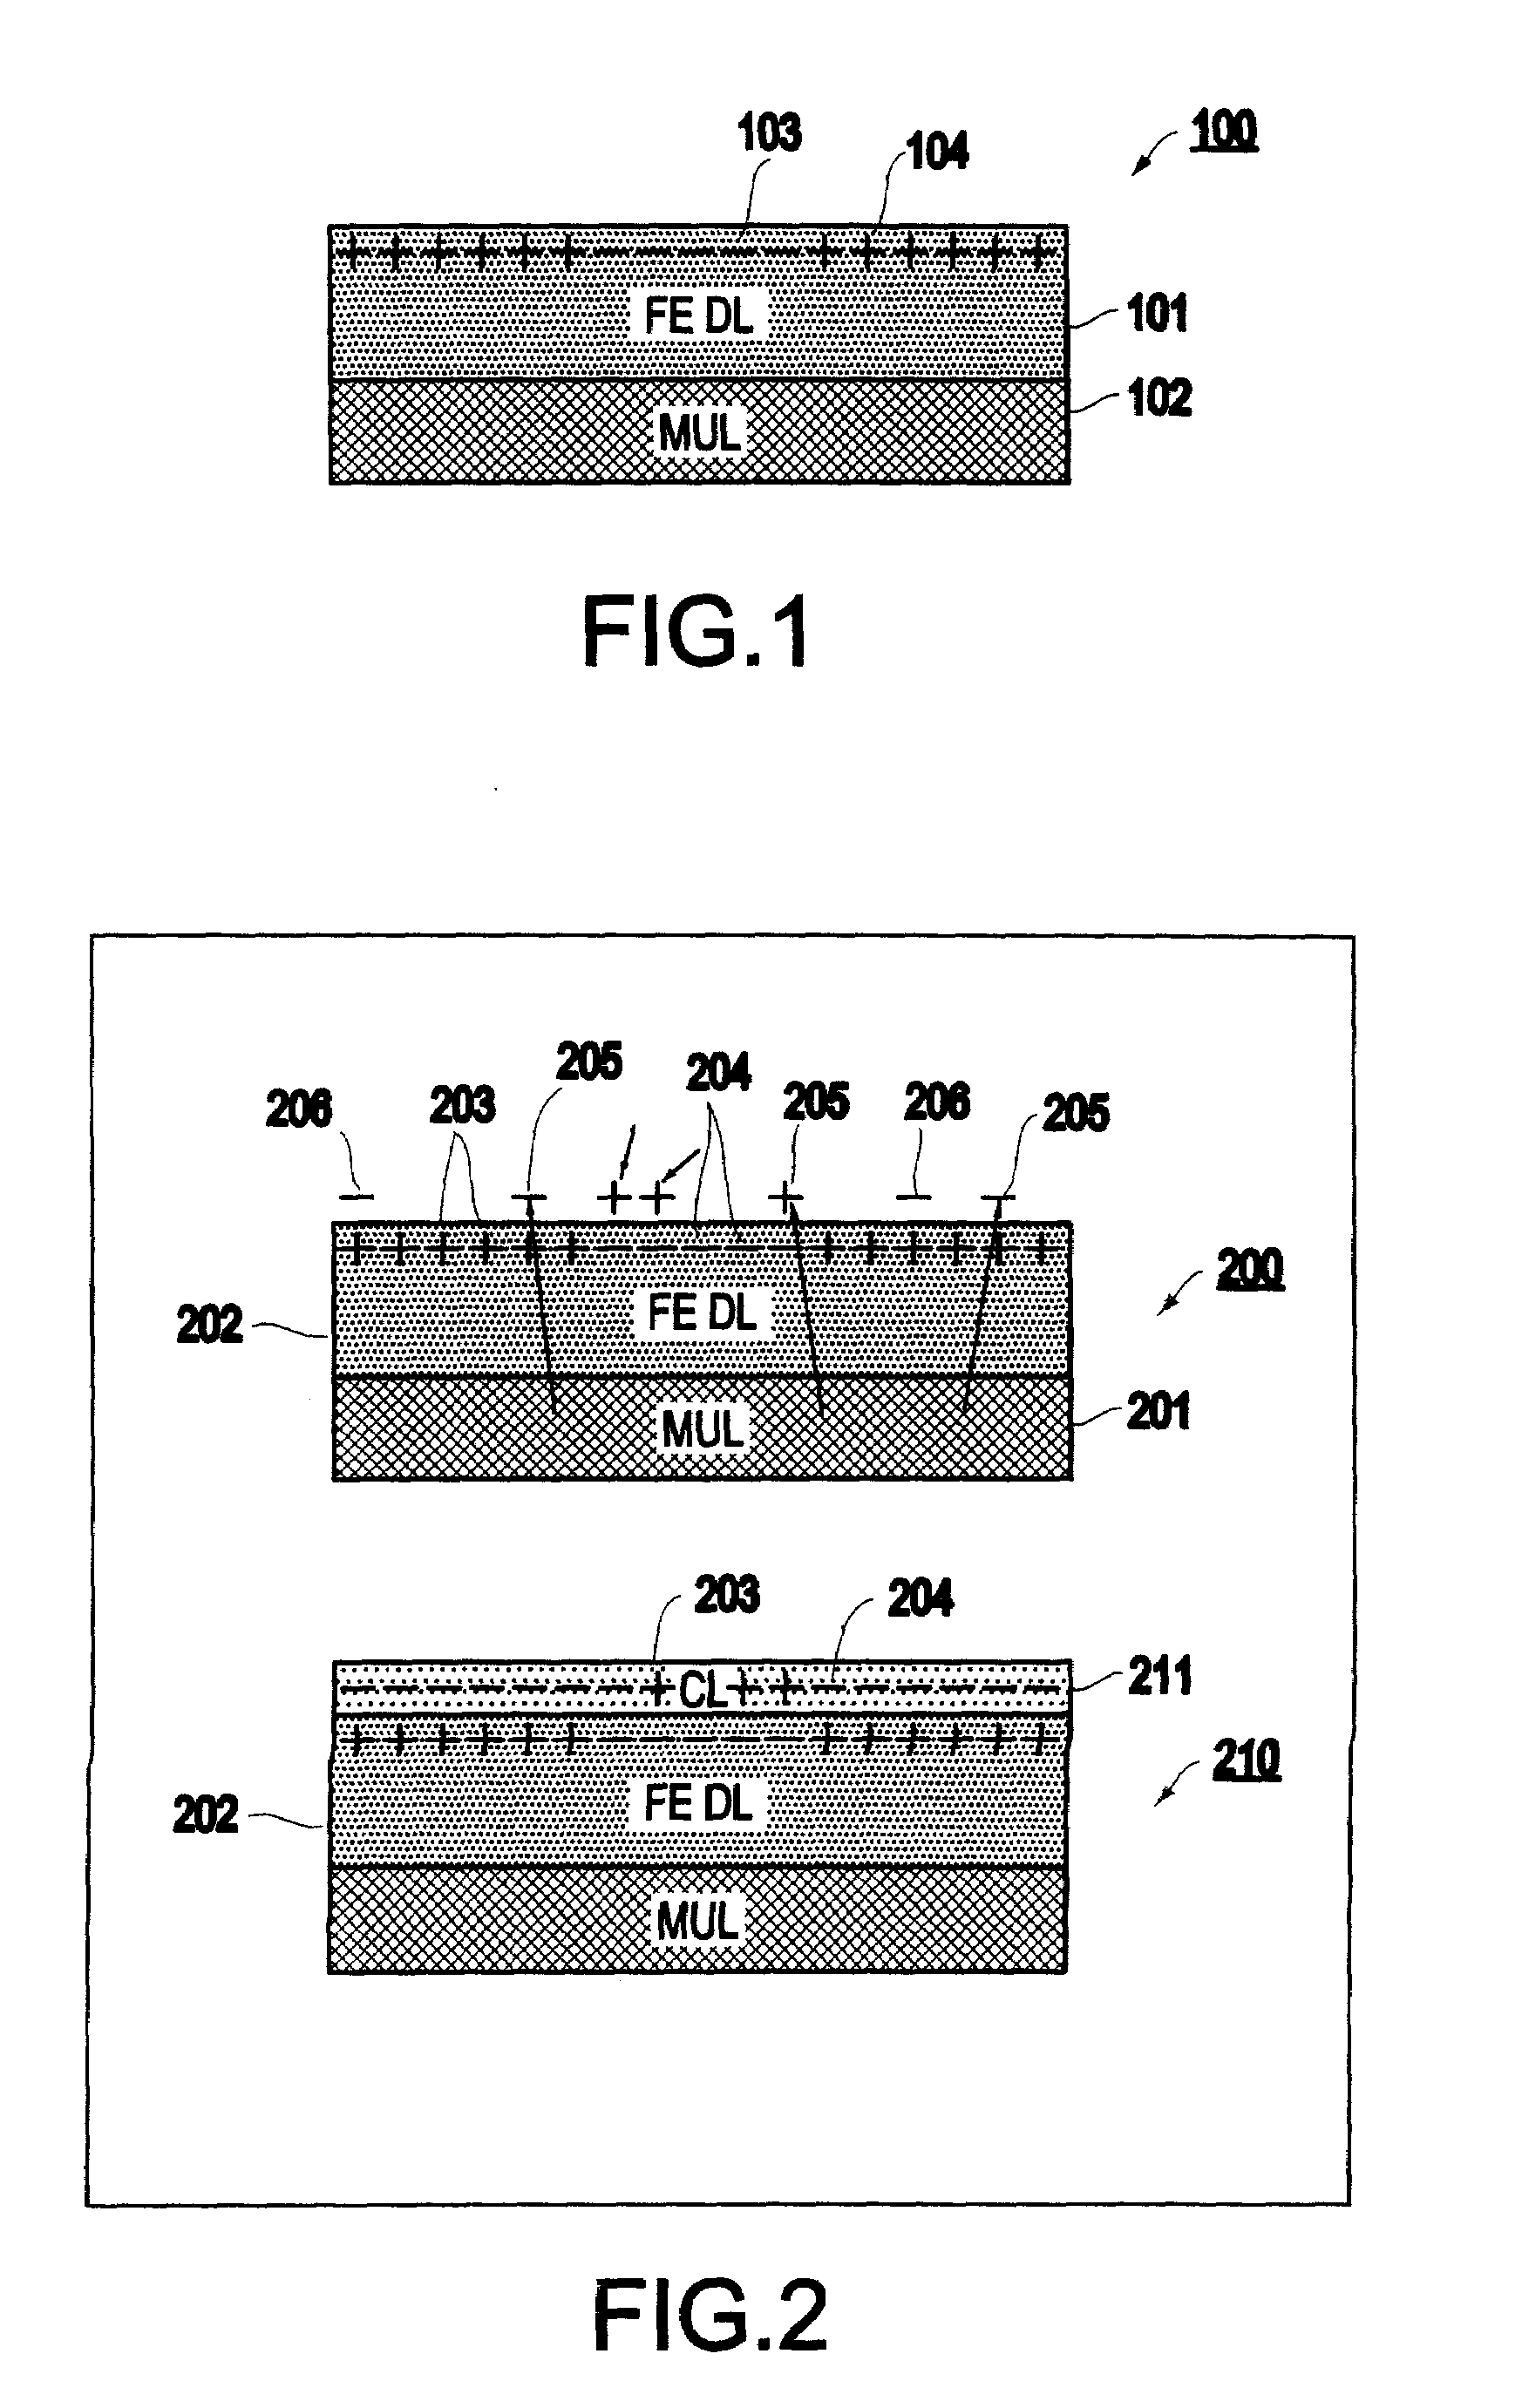 Method and structure for ultra-high density, high data rate ferroelectric storage disk technology using stabilization by a surface conducting layer